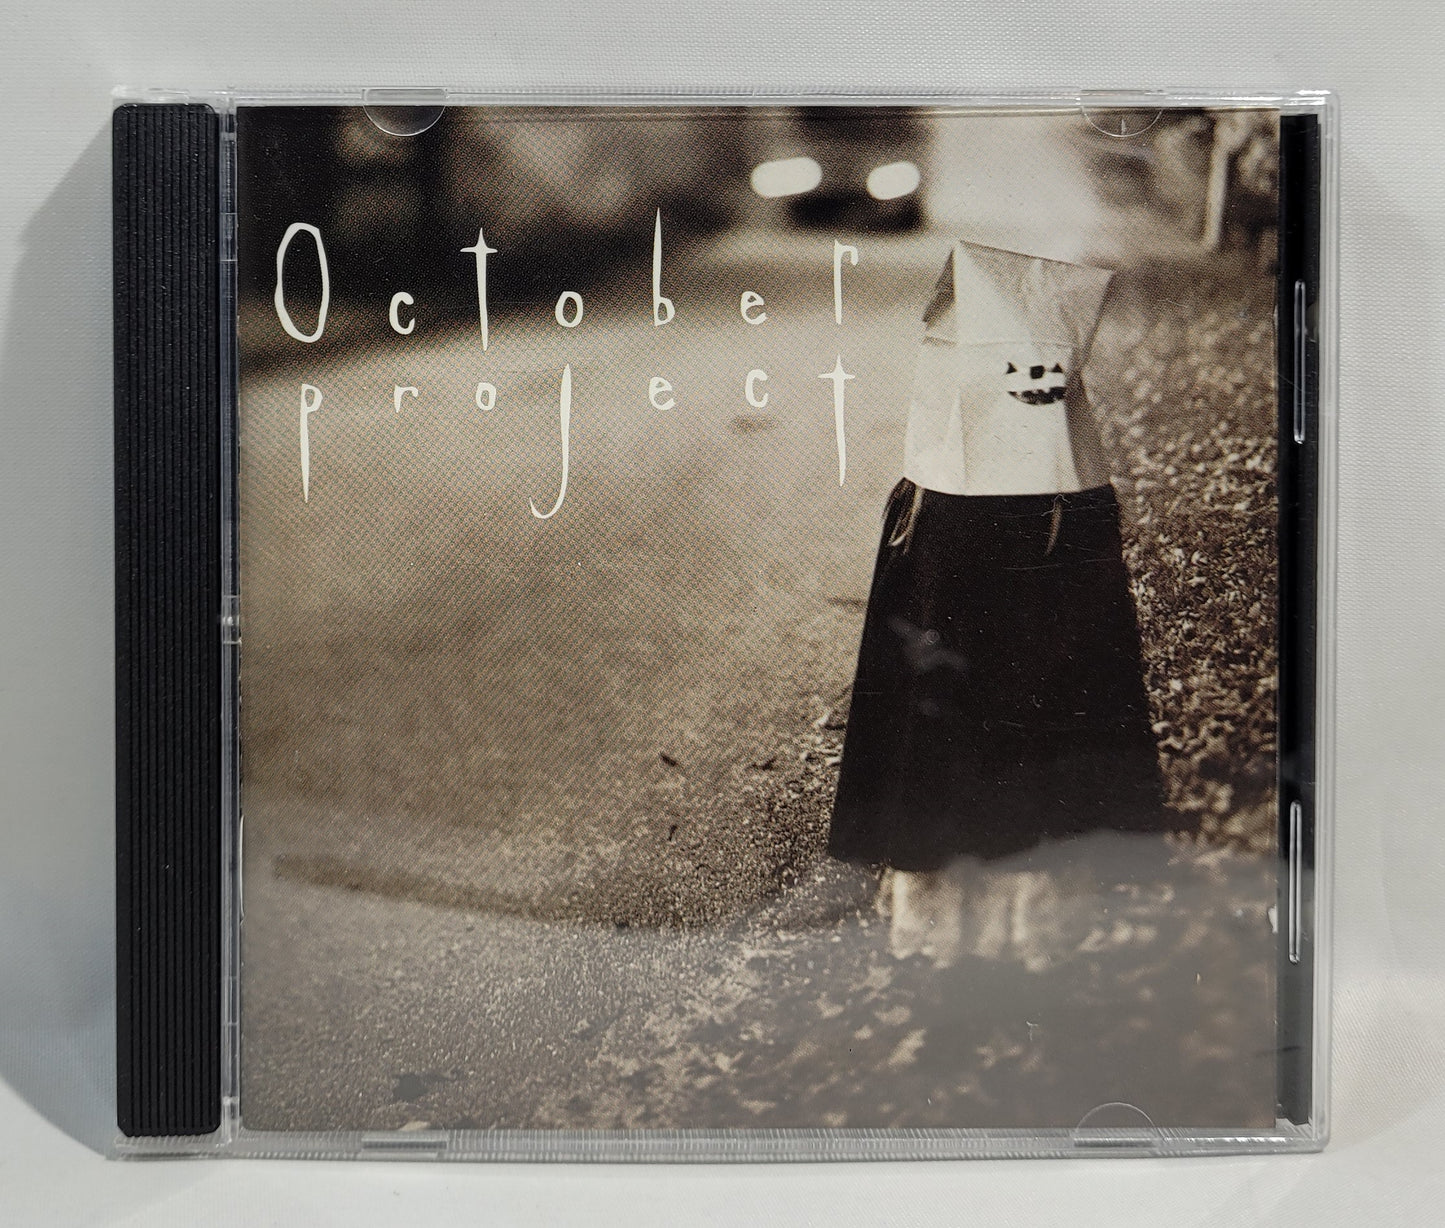 October Project - October Project [CD]